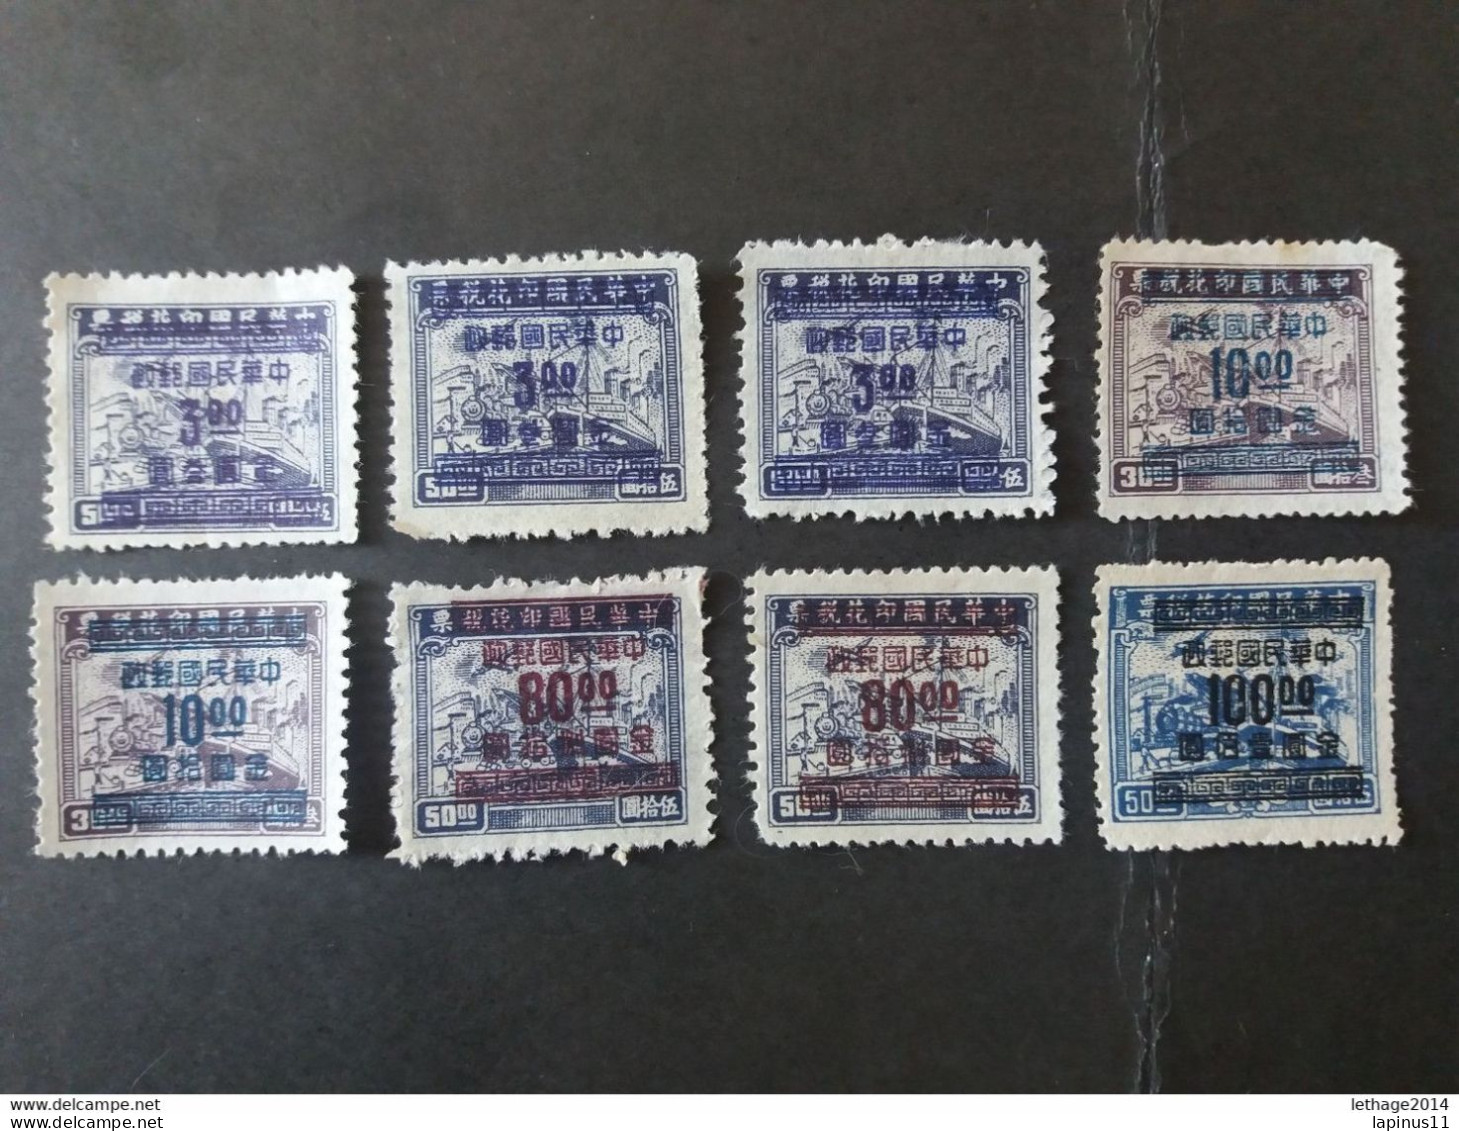 CHINE 中國 CHINA 1949 Revenue Stamps Surcharged - 1912-1949 Republik